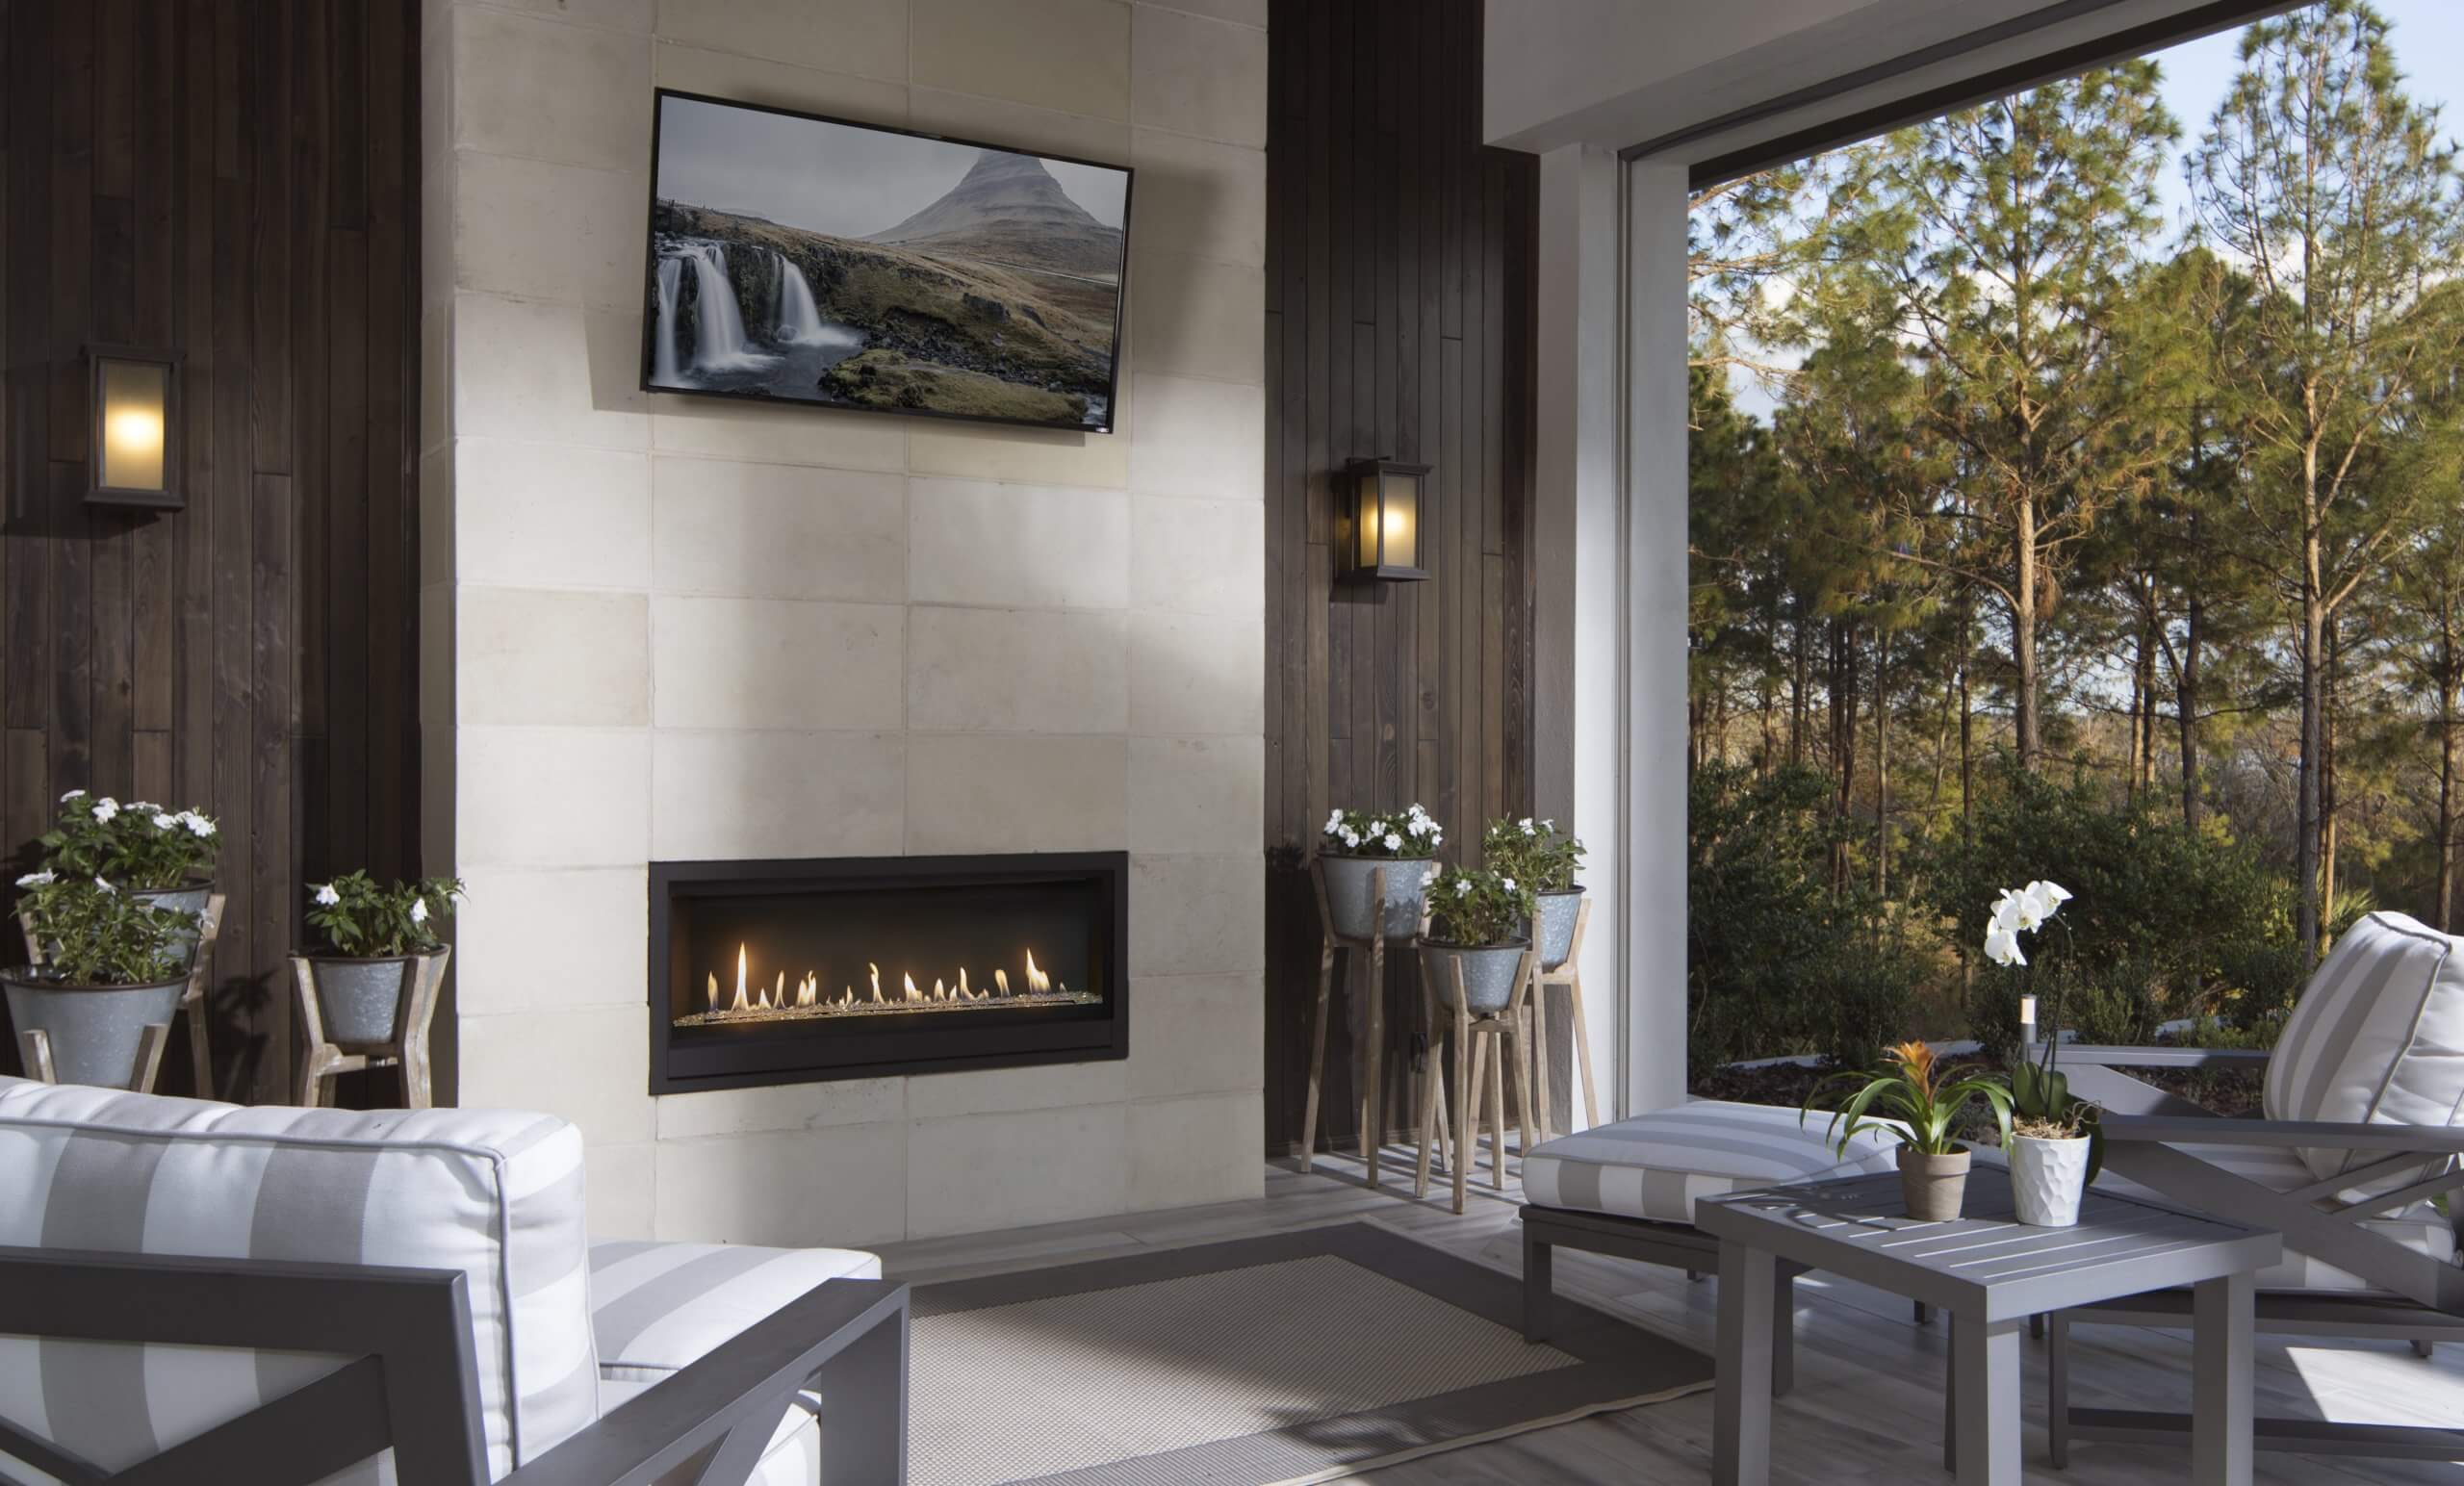 Outdoor room equipped with linear gas fireplace and TV above